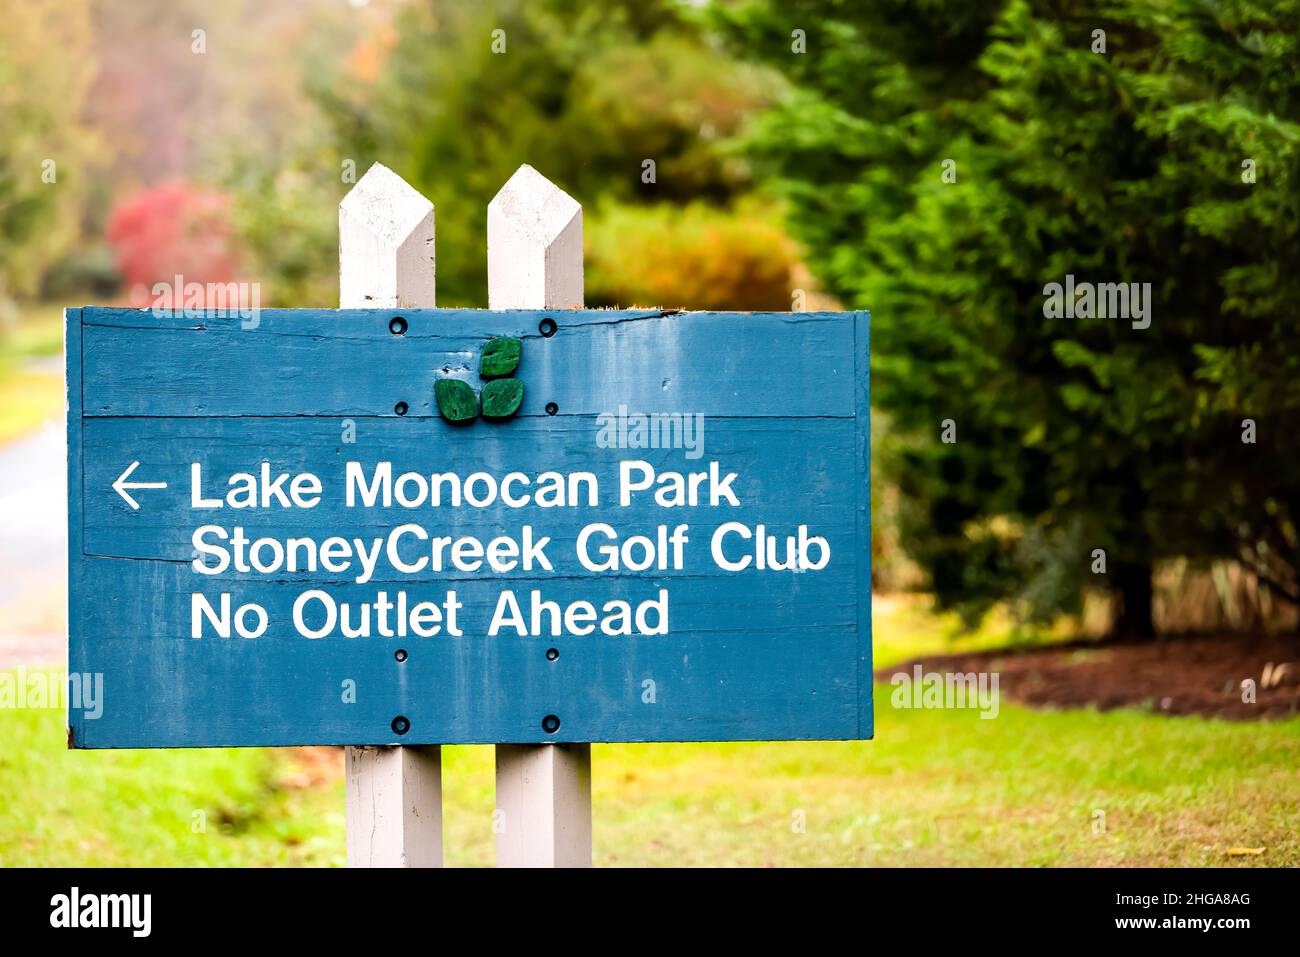 Wintergreen, USA - October 25, 2020: Ski resort town village in Blue Ridge mountains with sign entrance for Lake Monocan Park and Stoney Creek Golf Cl Stock Photo